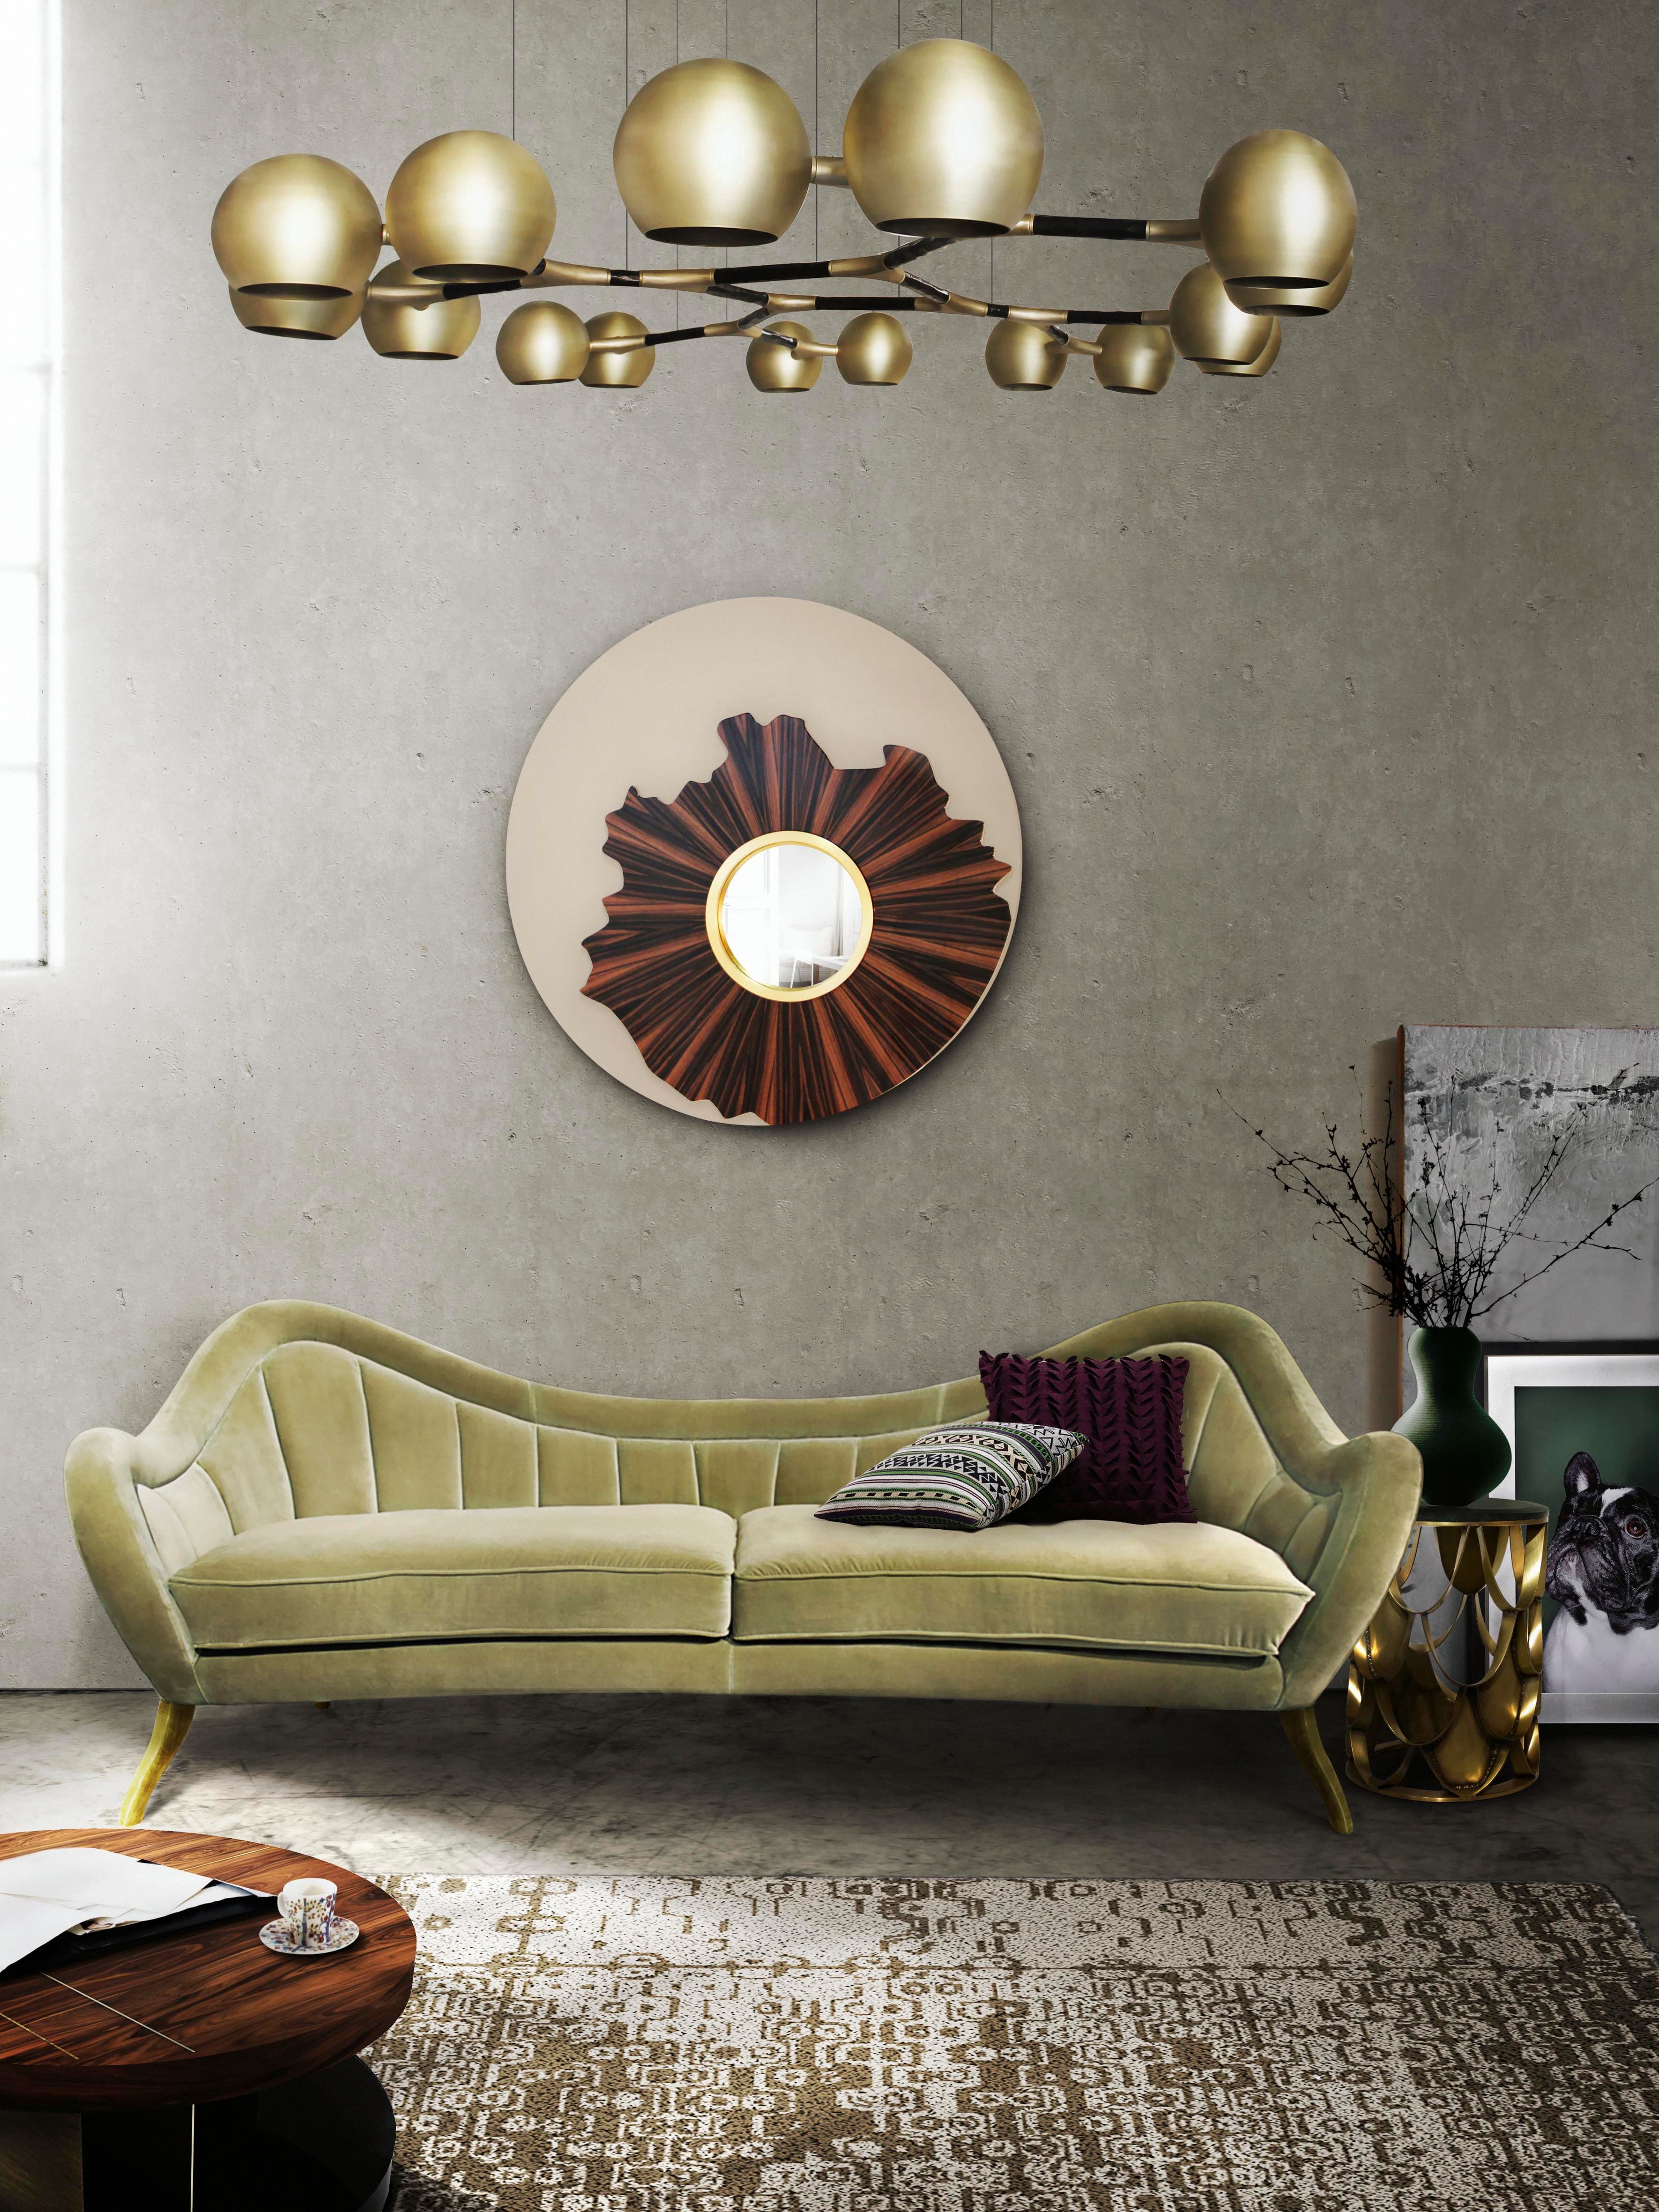 Simple Living Room Decor With Earthy Tones And Golden Details - Home'Society